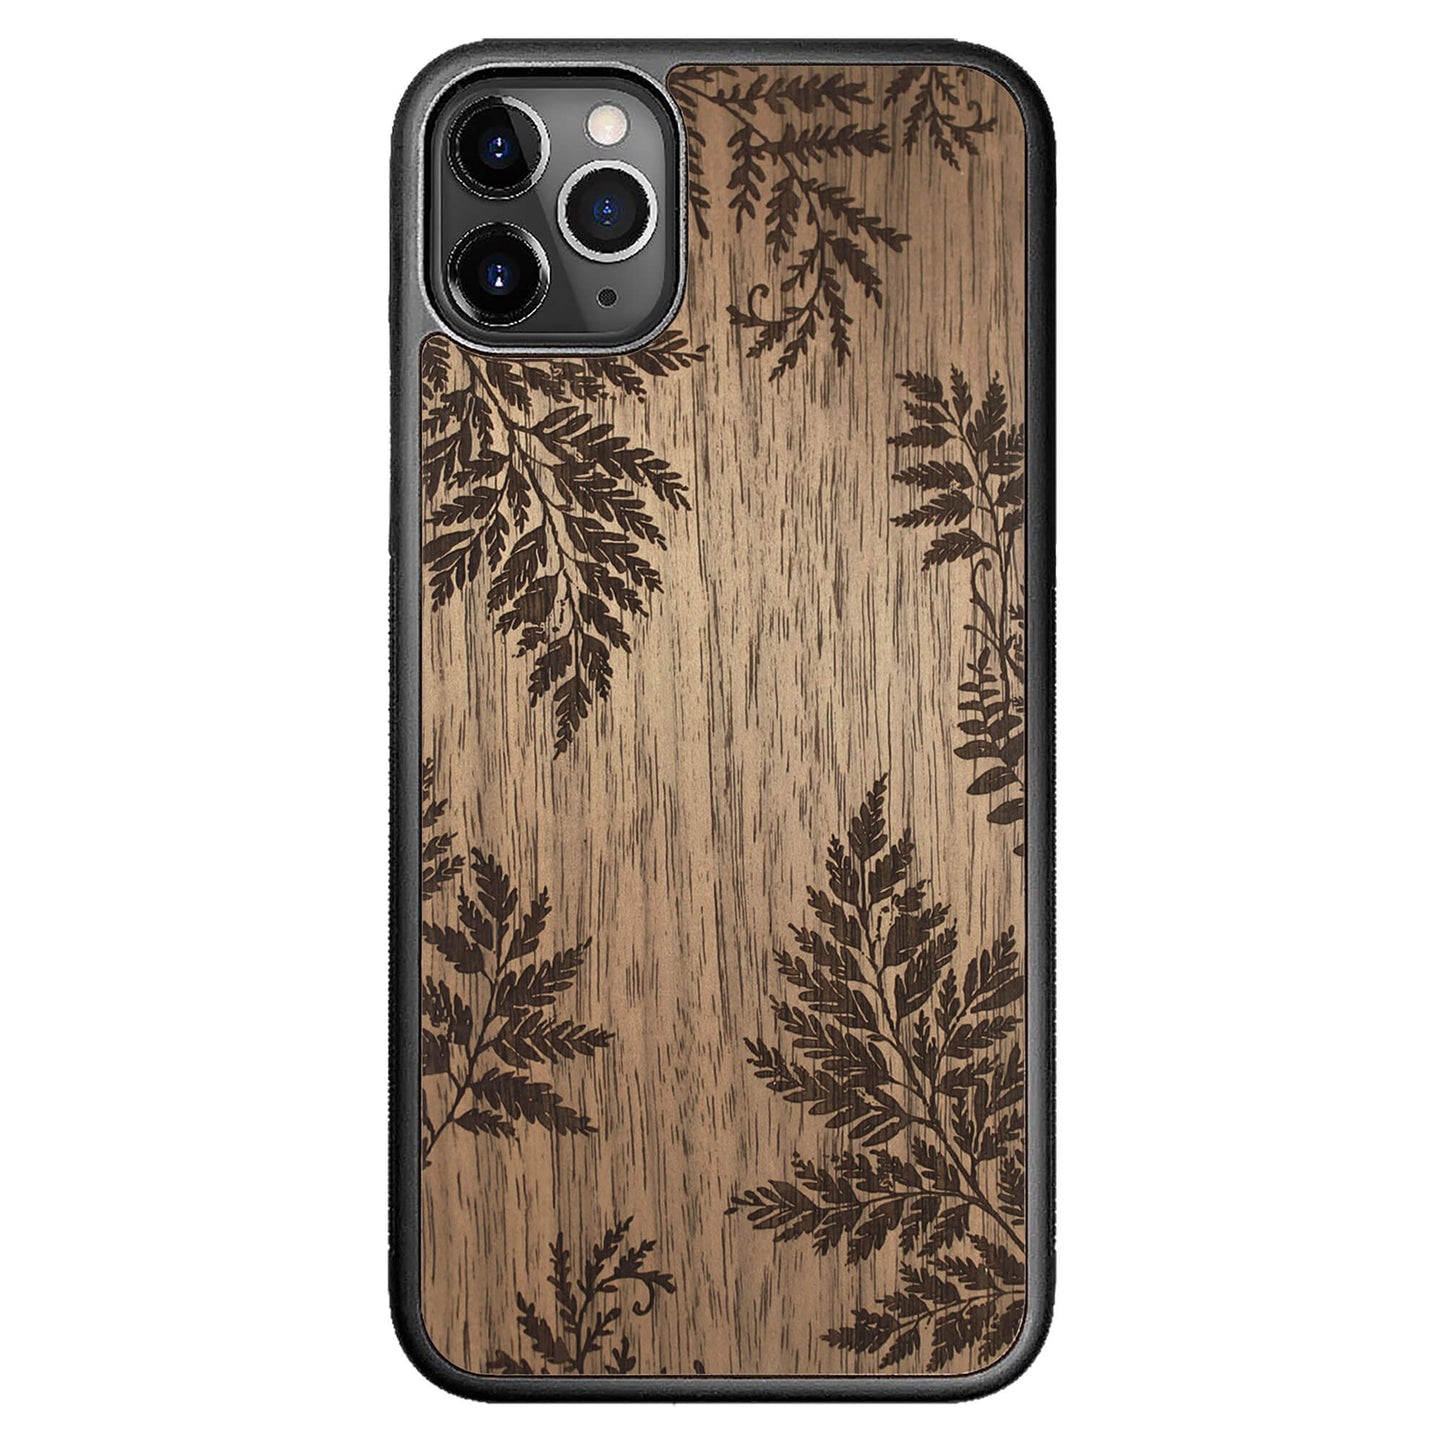 Wooden Case for iPhone 11 Pro Max Botanical Fern